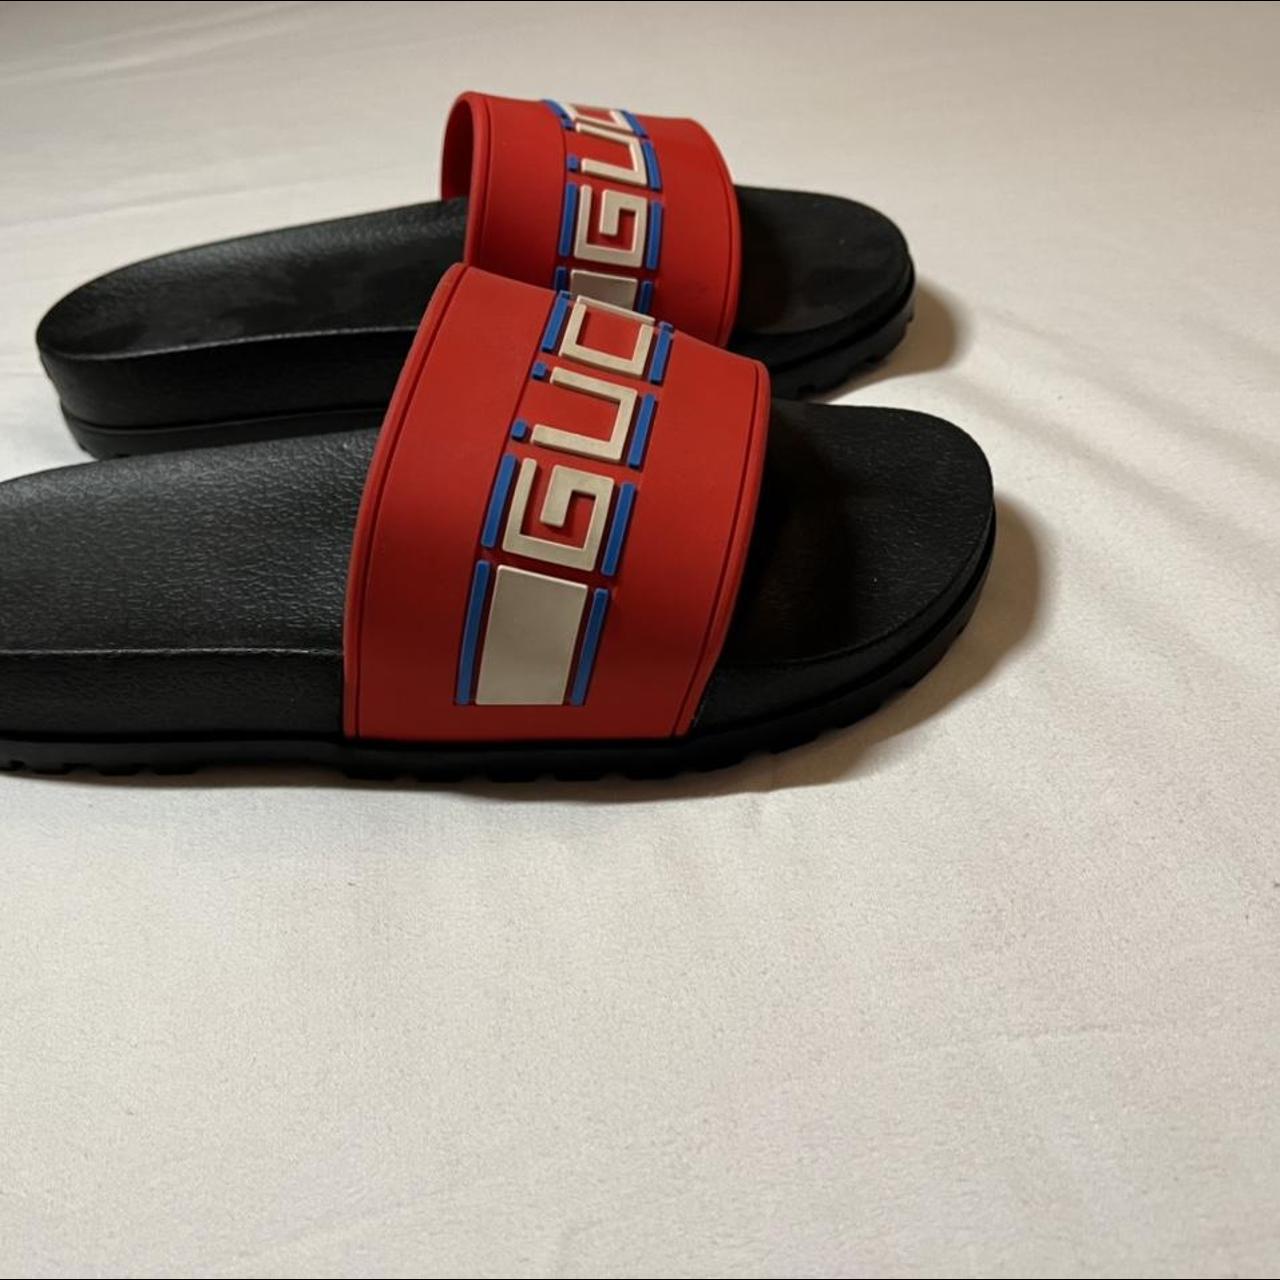 GUCCI slides with tiger graphic 2017 collection - Depop